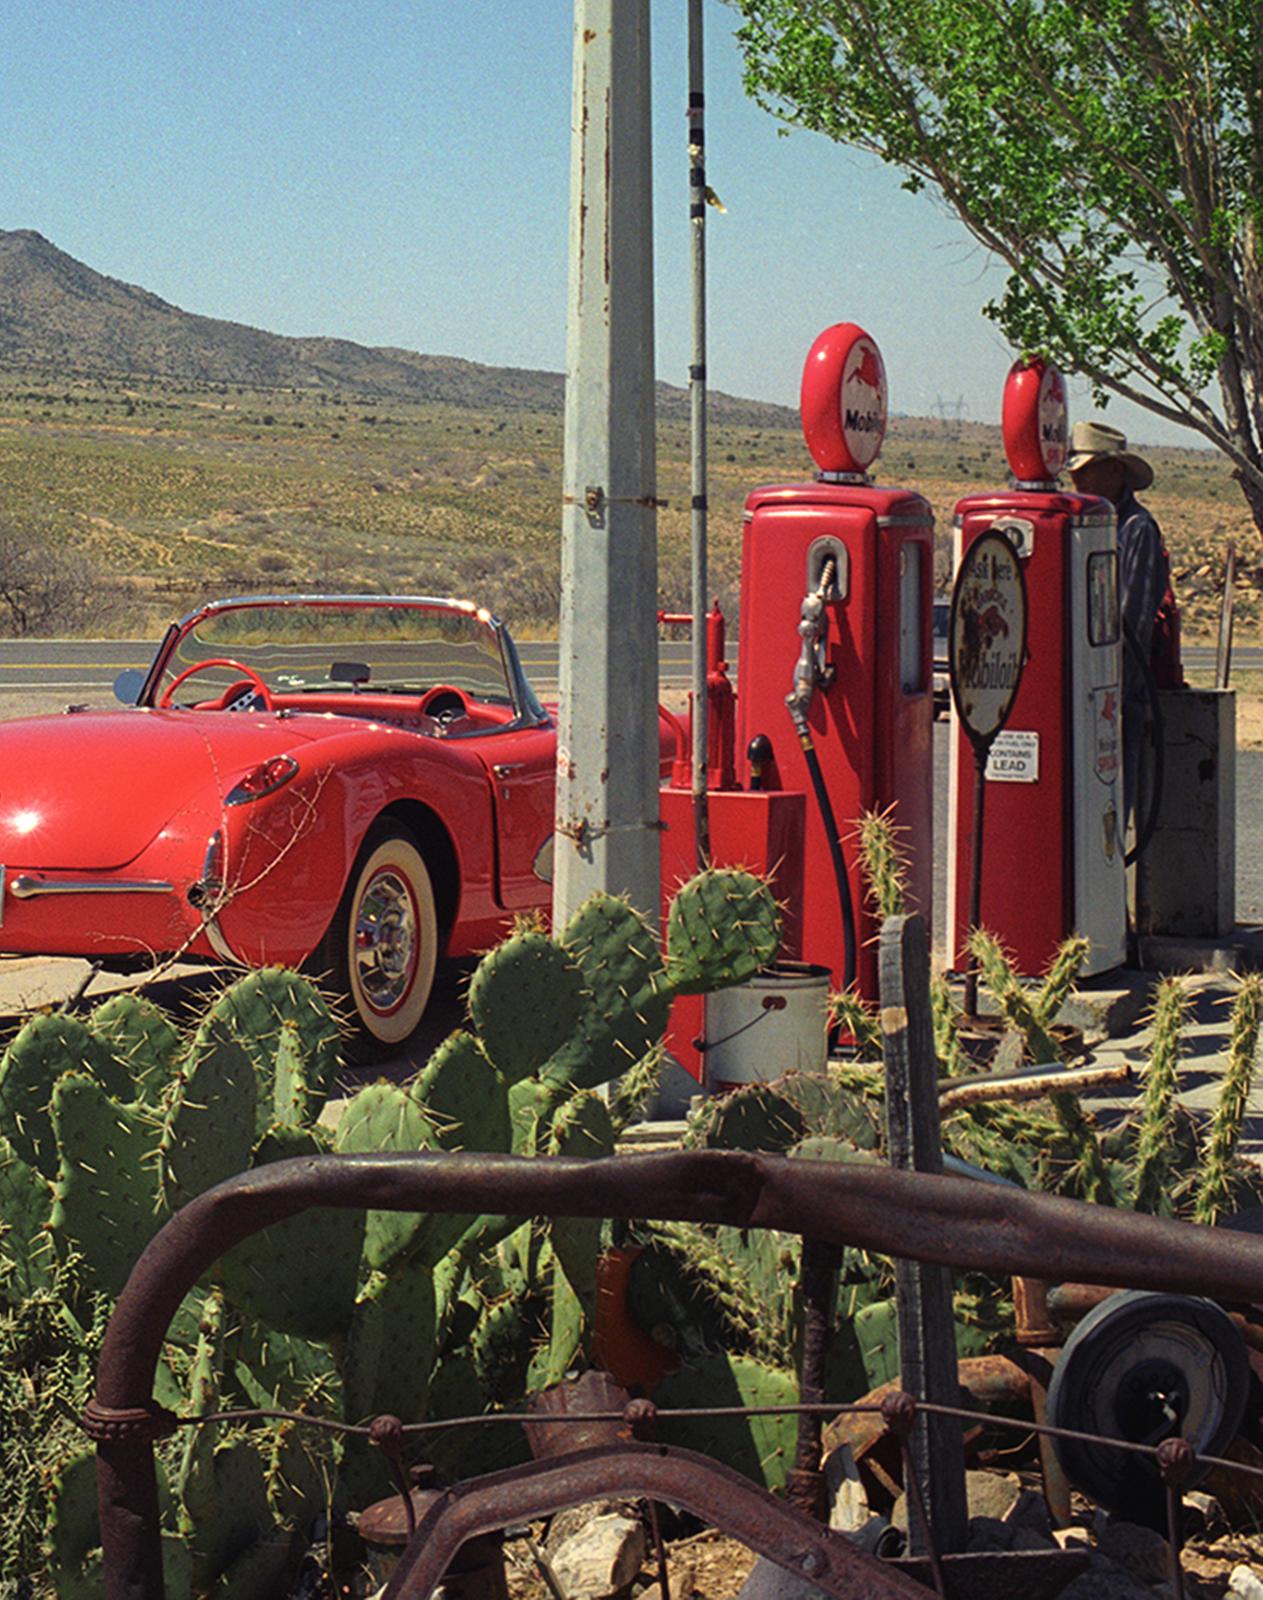 Corvette in the desert - Signed limited edition car print, USA, Contemporary, Red - Photograph by Geoff Halpin